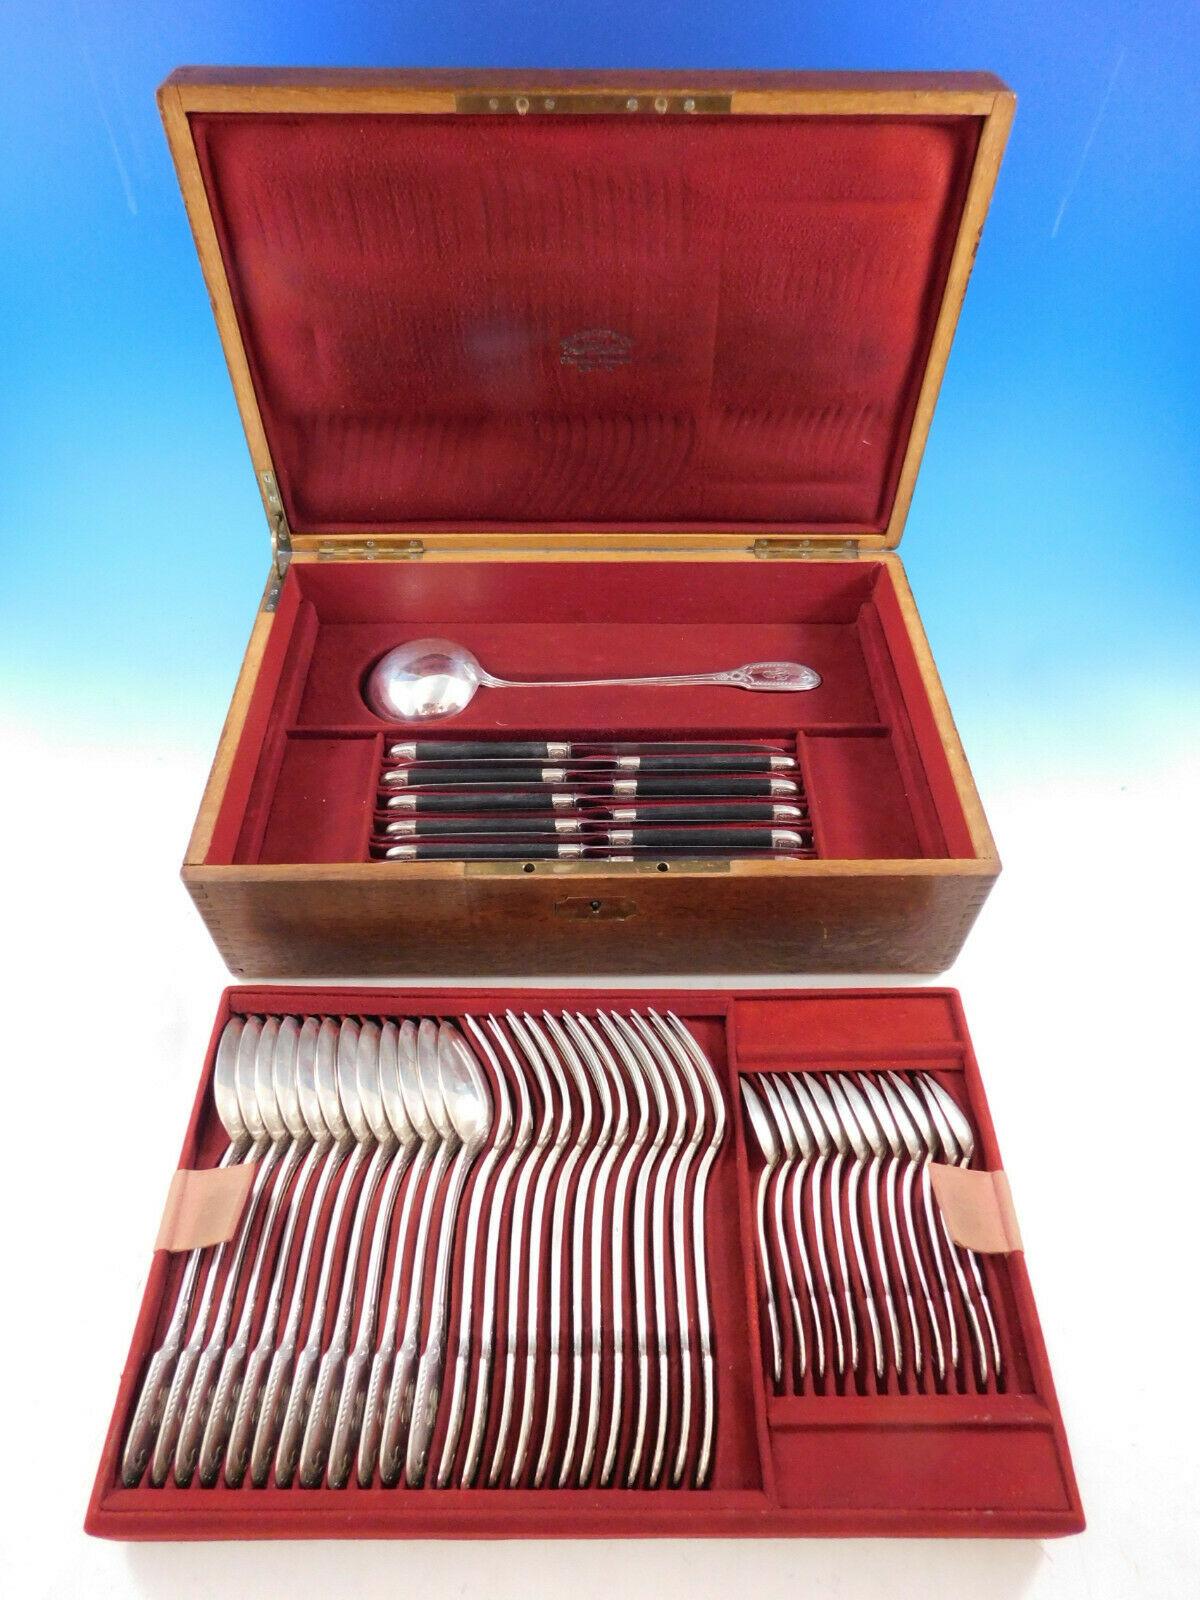 The Parisian silversmith Puiforcat is regarded as one of the legendary names in European silver craftsmanship. 
Superb Empire by Puiforcat sterling silver flatware set, 49 pieces in fitted chest. This rare pattern features an elegant swan motif.